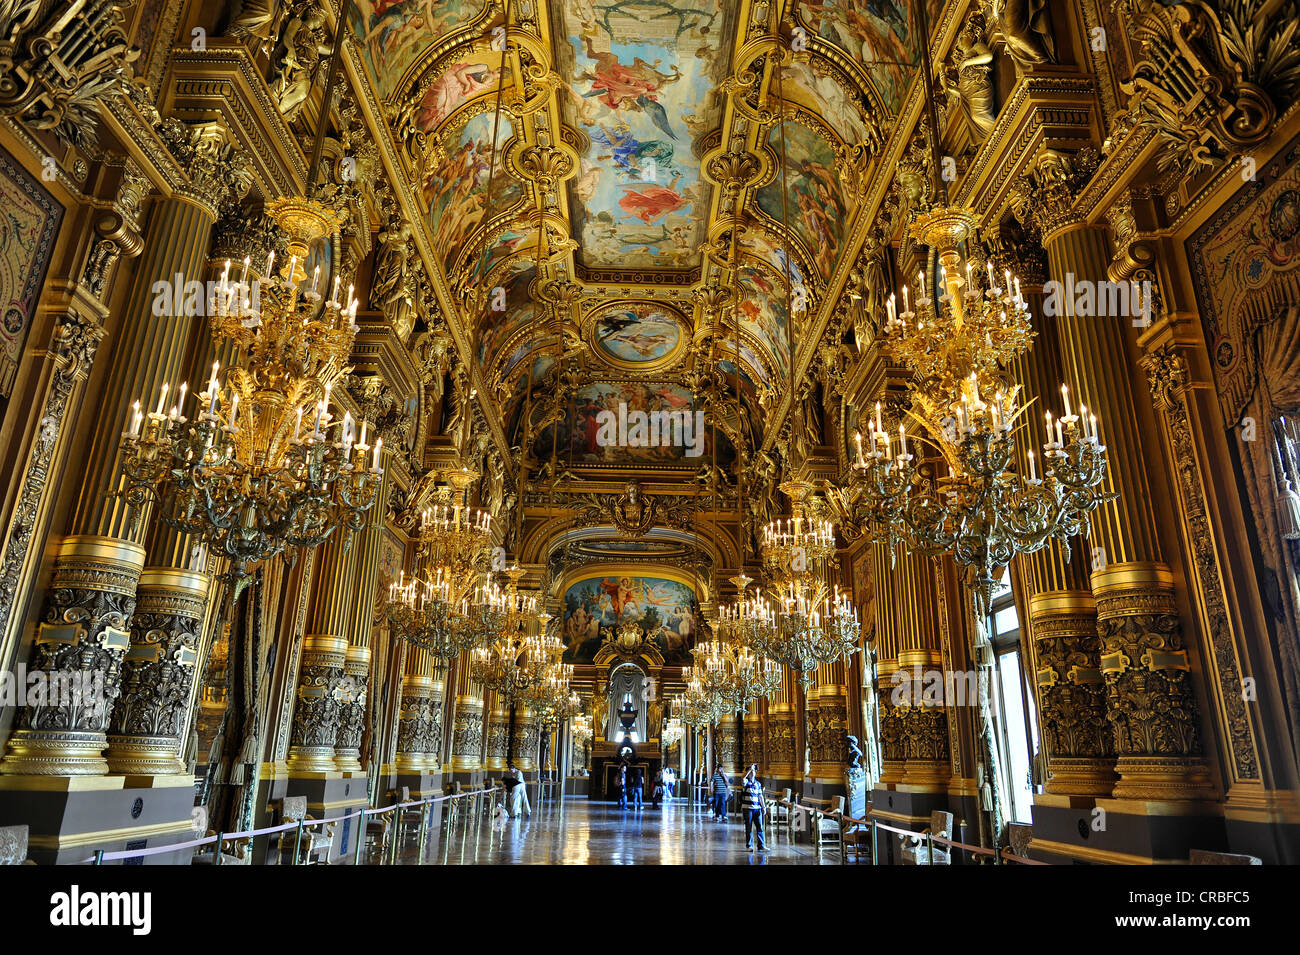 Interior, Grand Foyer with ceiling painting by Paul Baudry with motifs from music history, Opera Palais Garnier, Paris, France Stock Photo